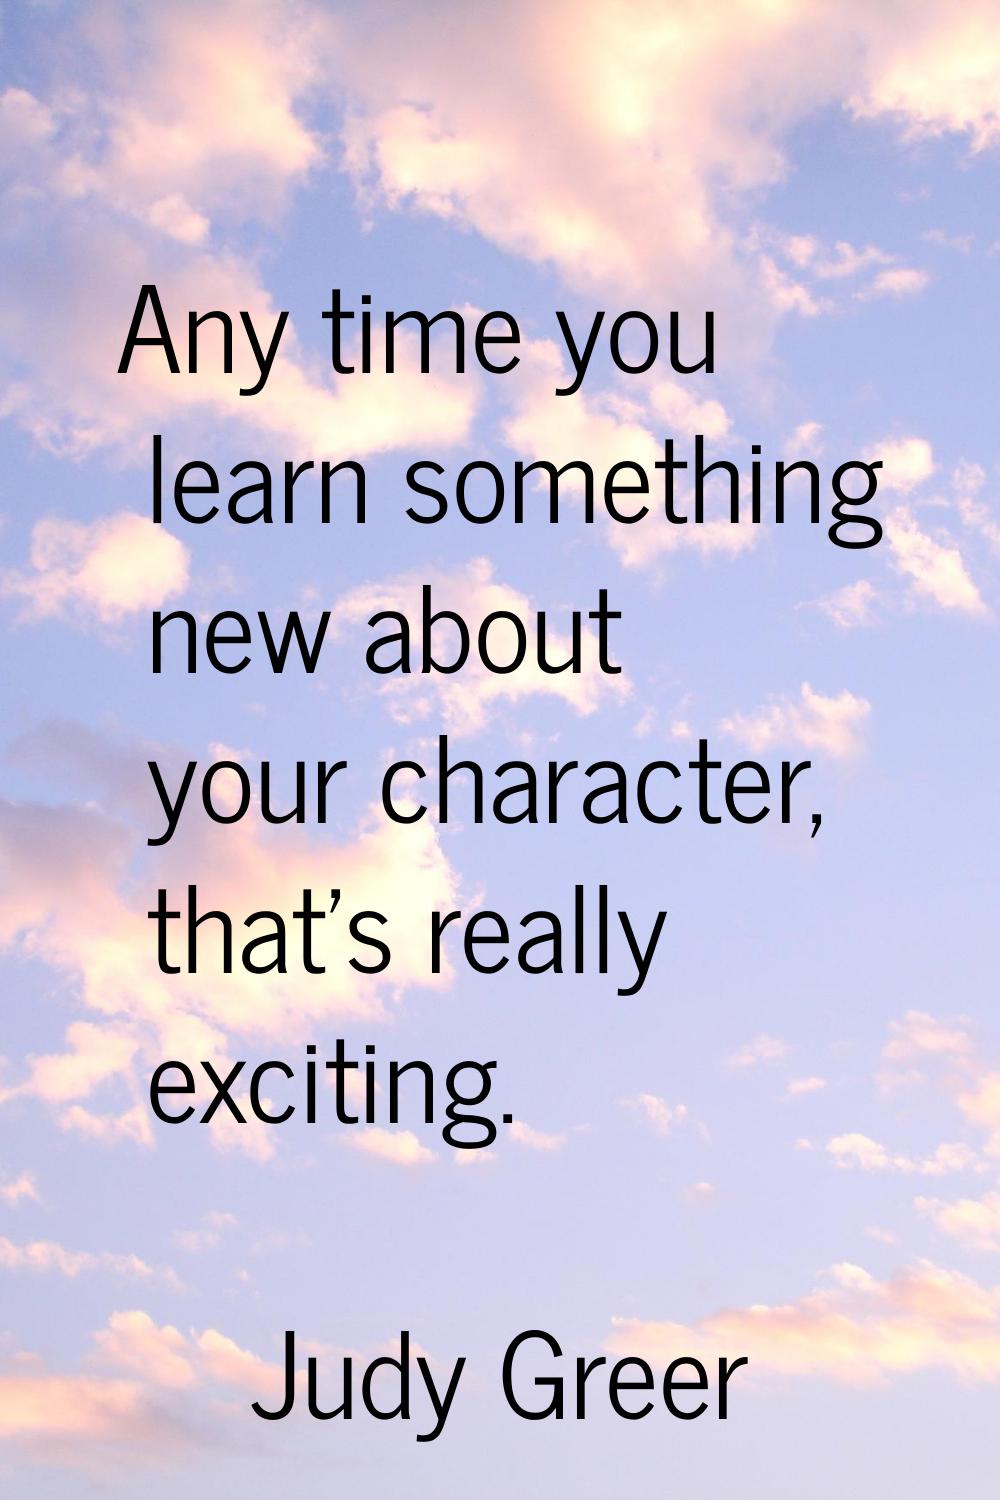 Any time you learn something new about your character, that's really exciting.